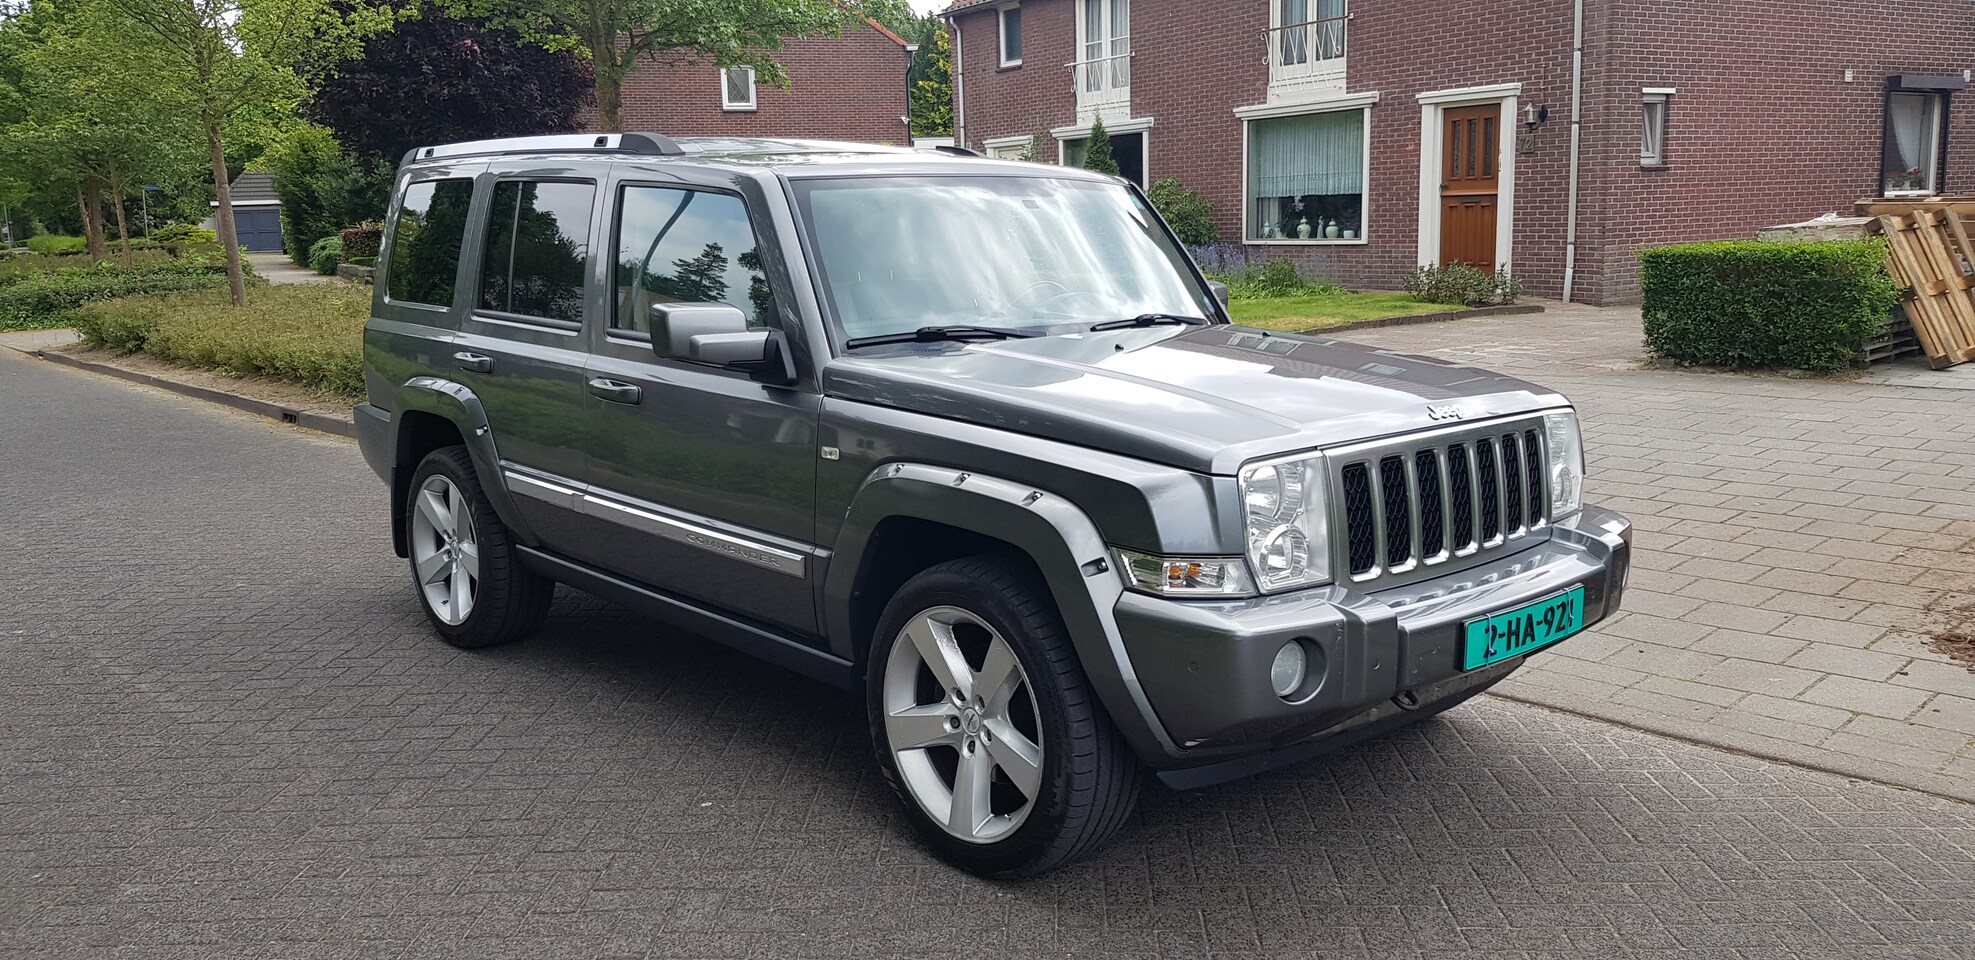 formaat Piket Slot jeep commander netherlands used – Search for your used car on the parking